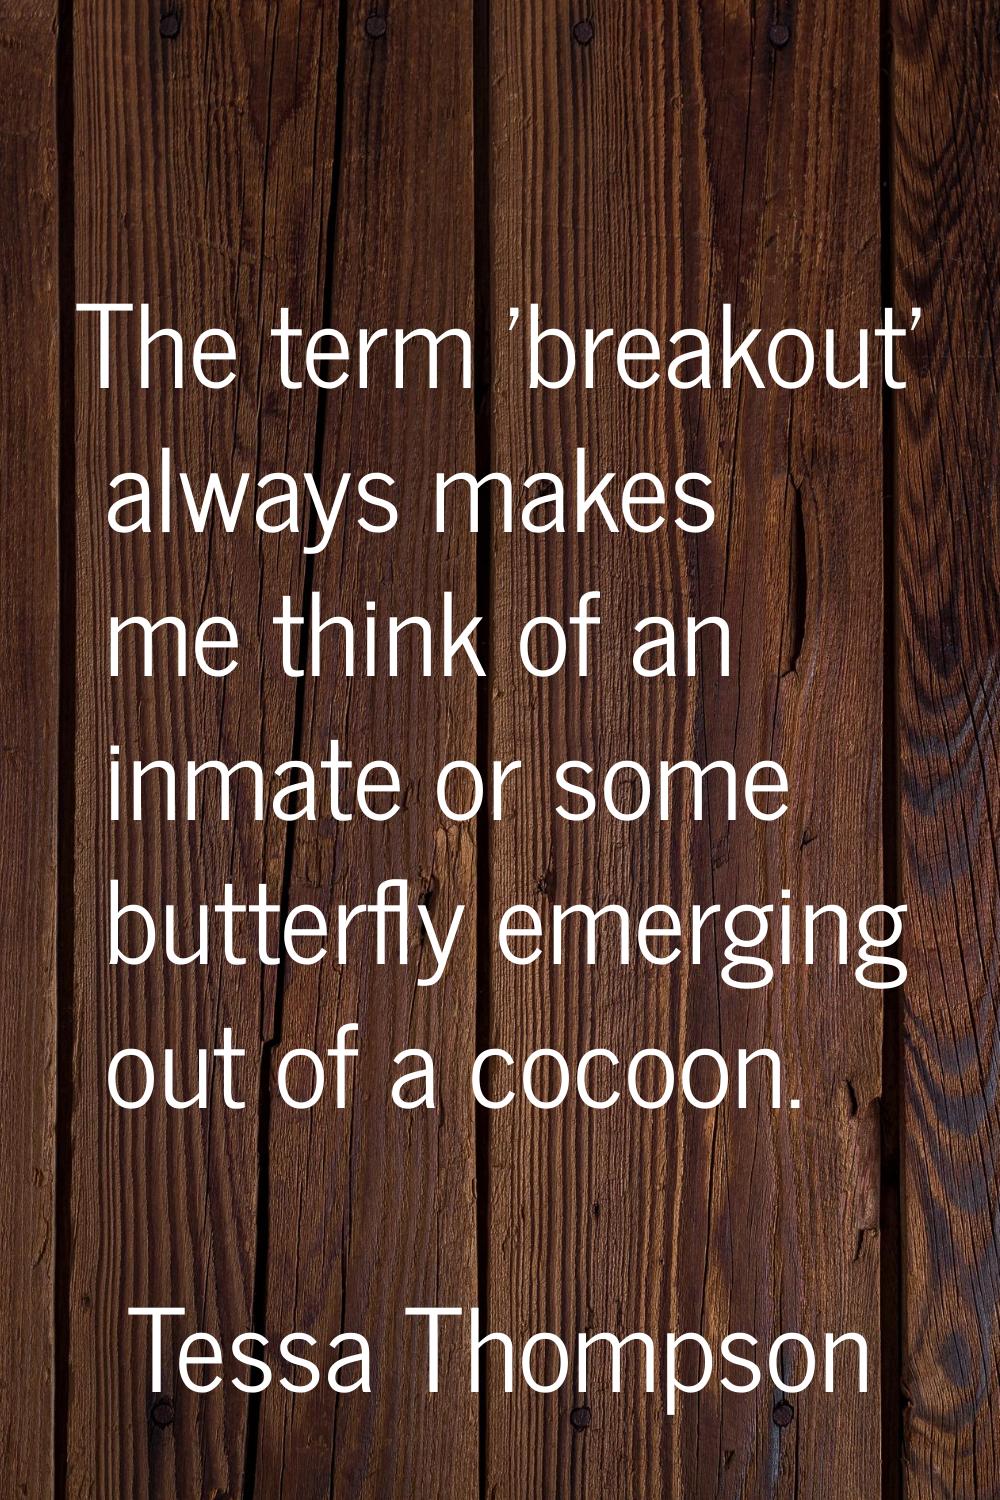 The term 'breakout' always makes me think of an inmate or some butterfly emerging out of a cocoon.